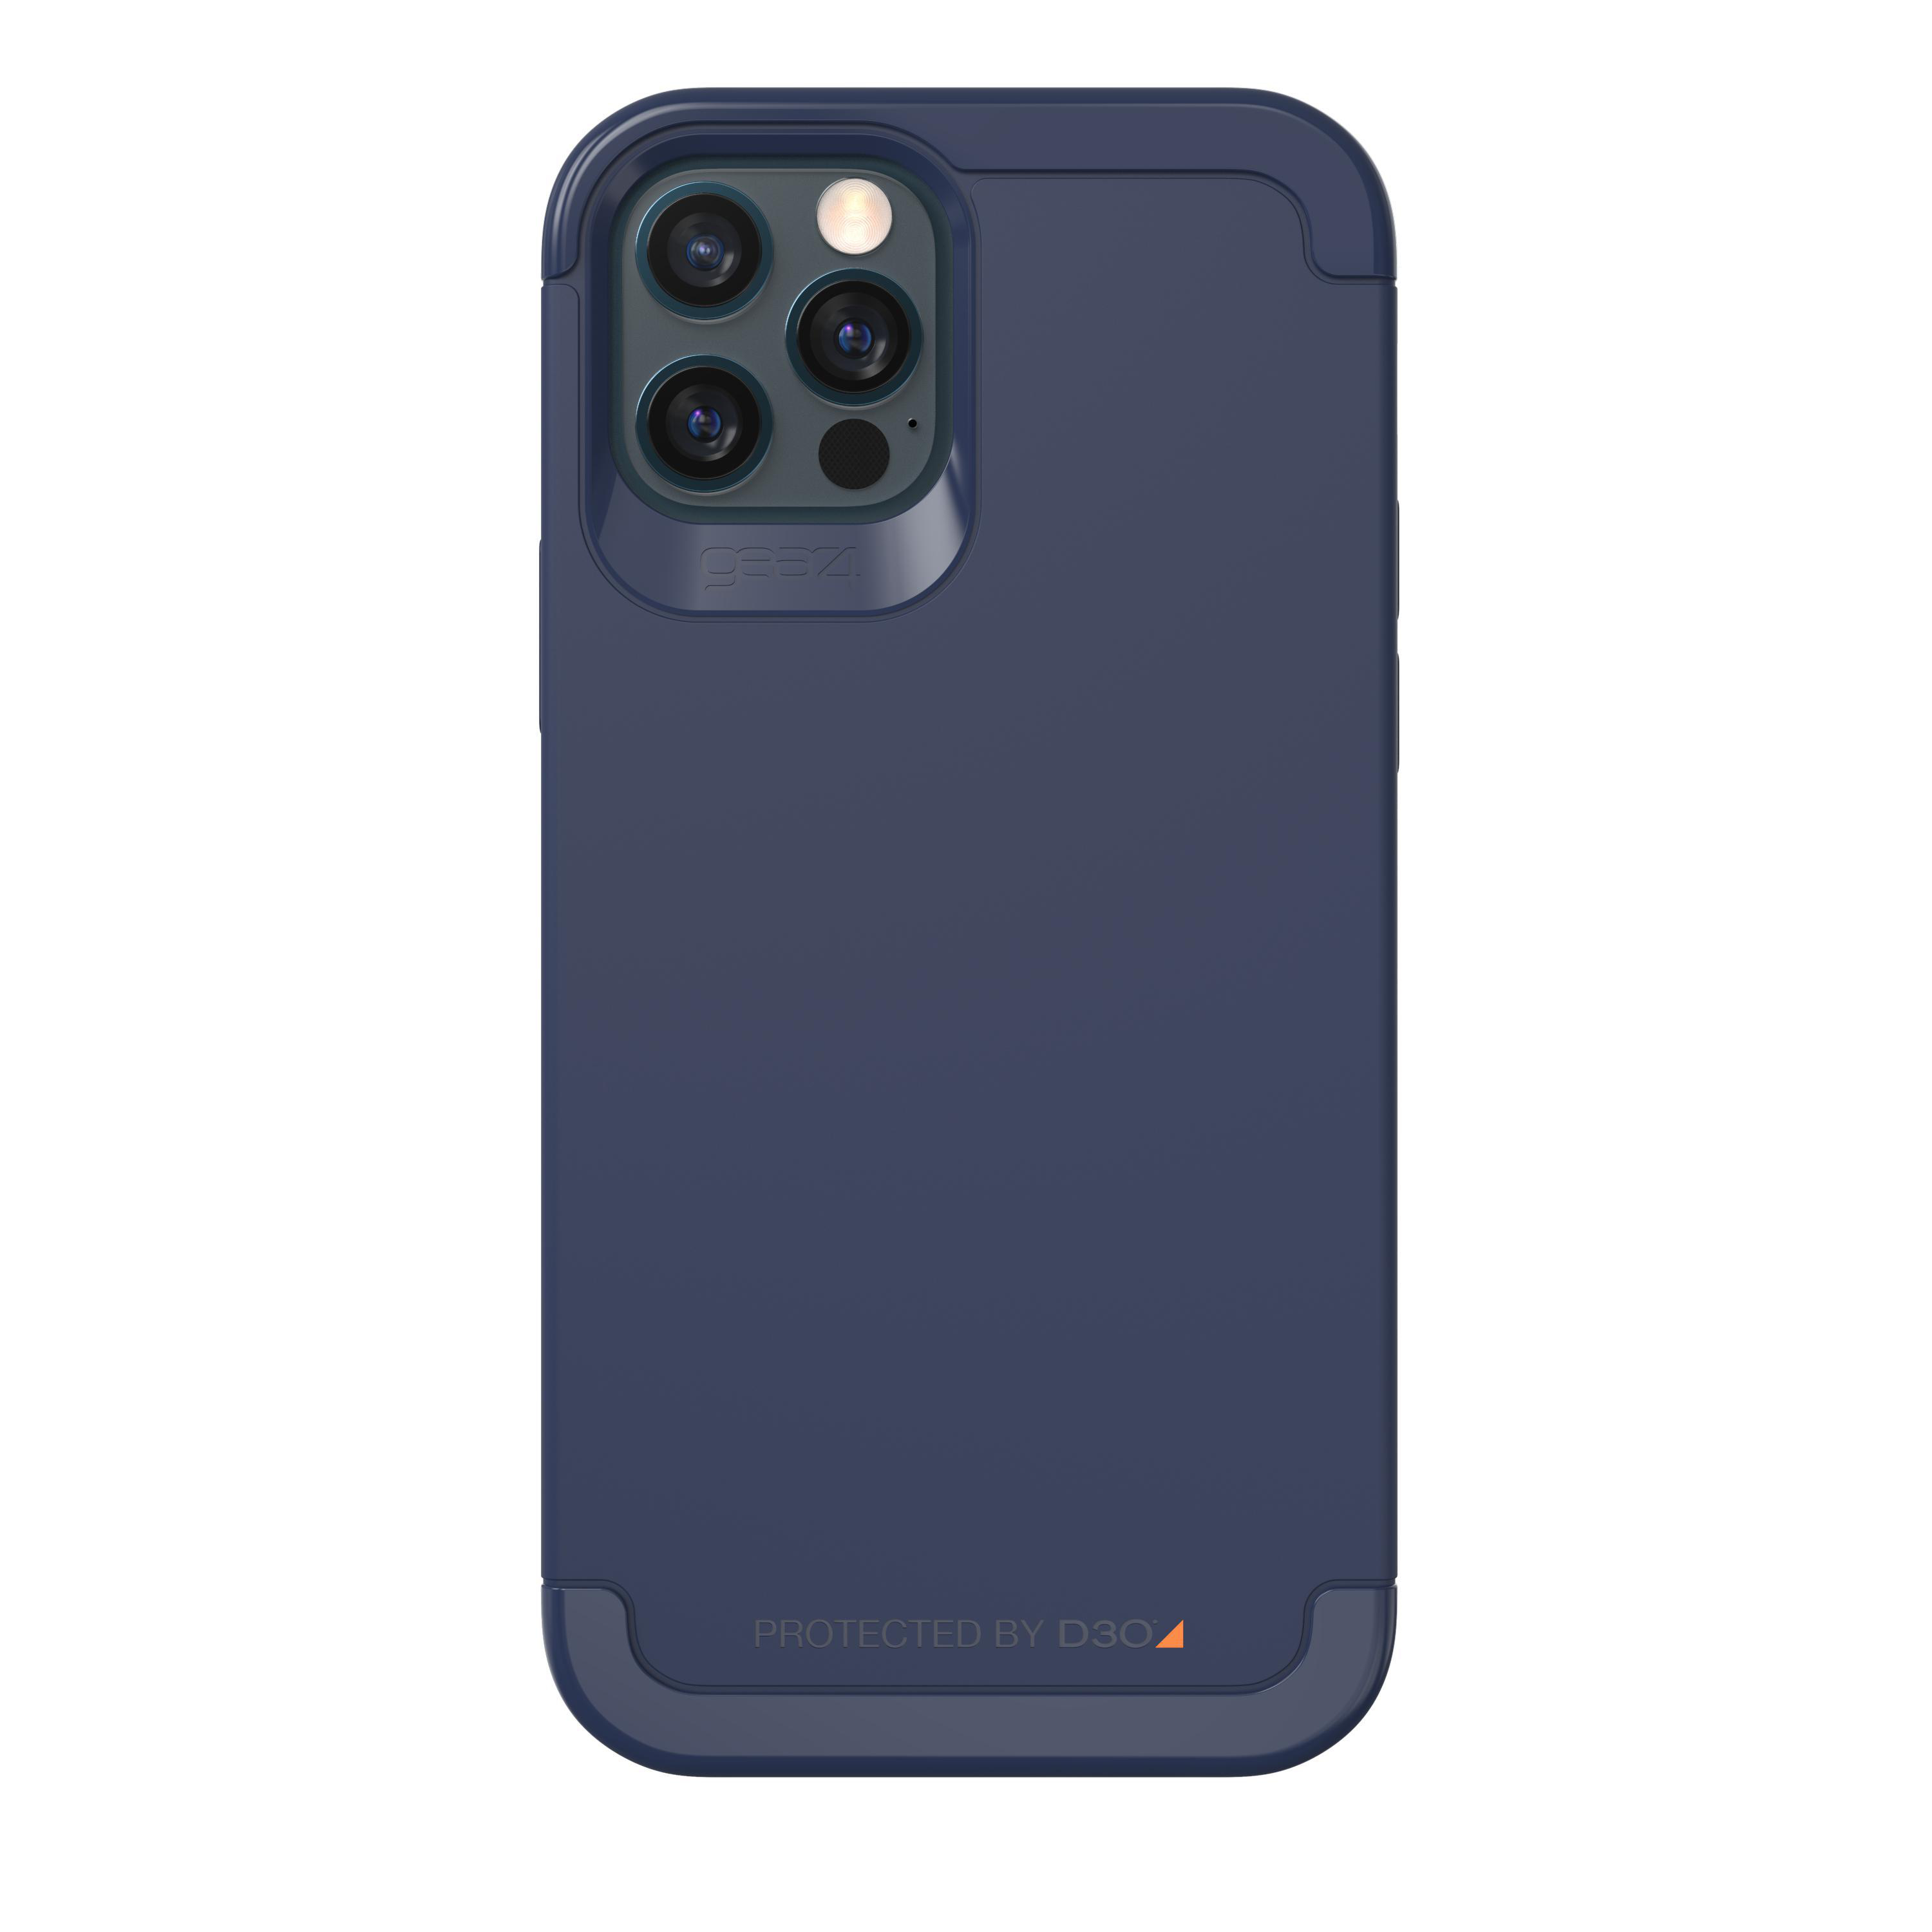 GEAR4 D3O Wembley Navy Apple, 12/12 blue Pro, Palette, iPhone Backcover